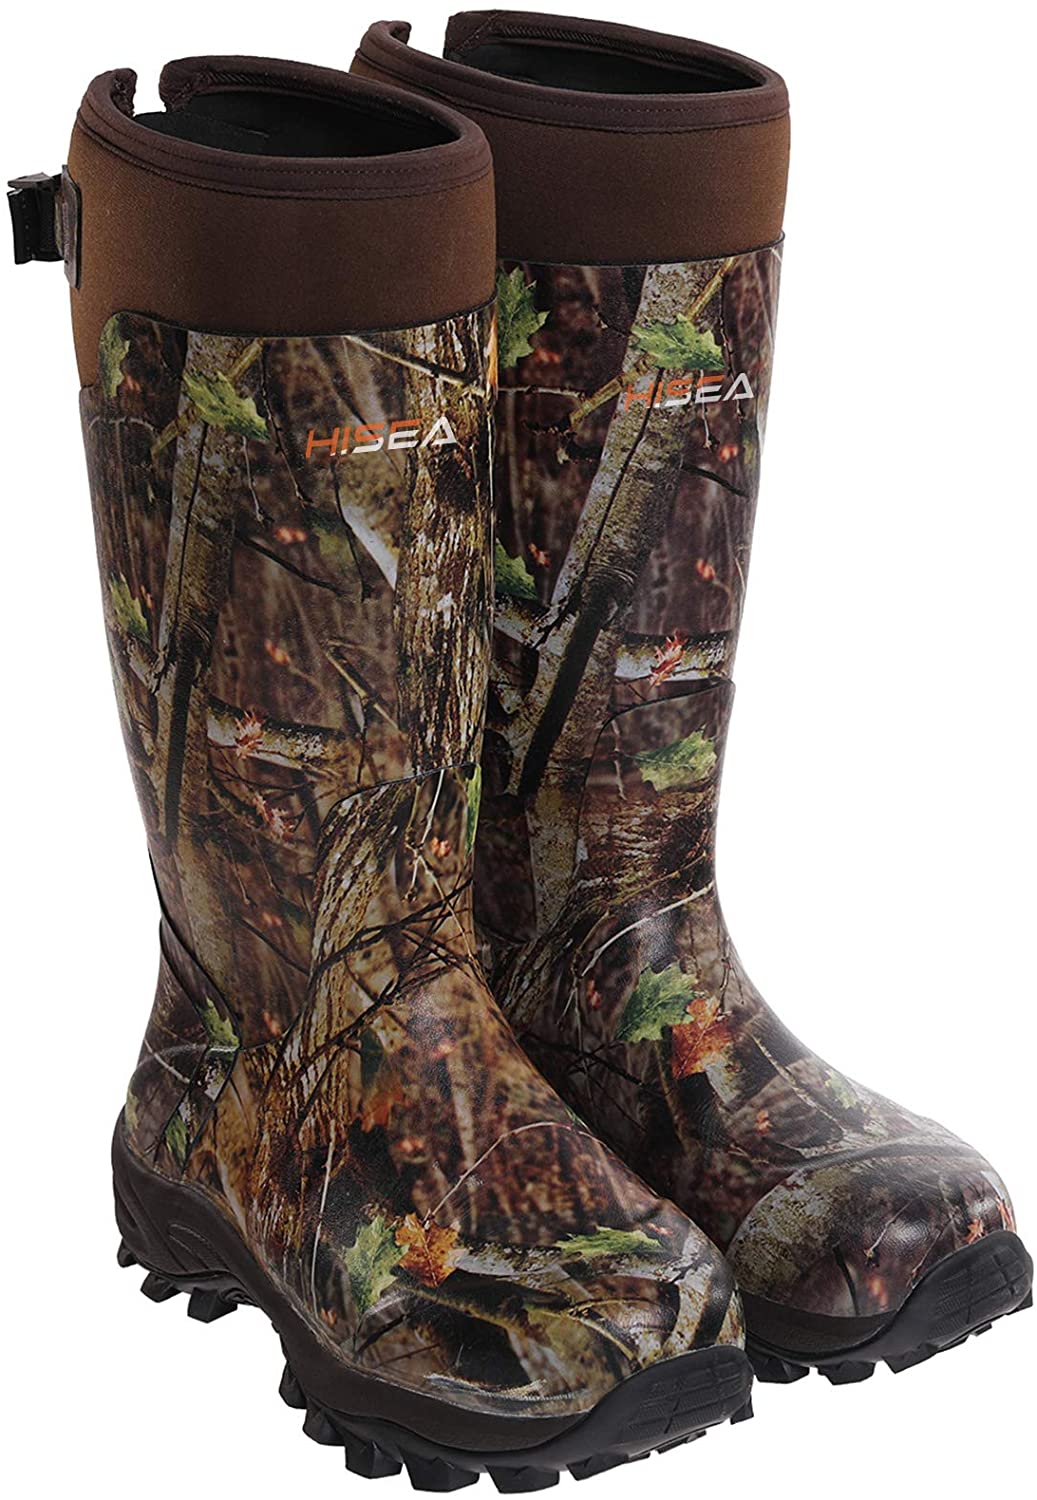 HISEA Apollo Basic Hunting Boots for Men Waterproof Insulated, Camo